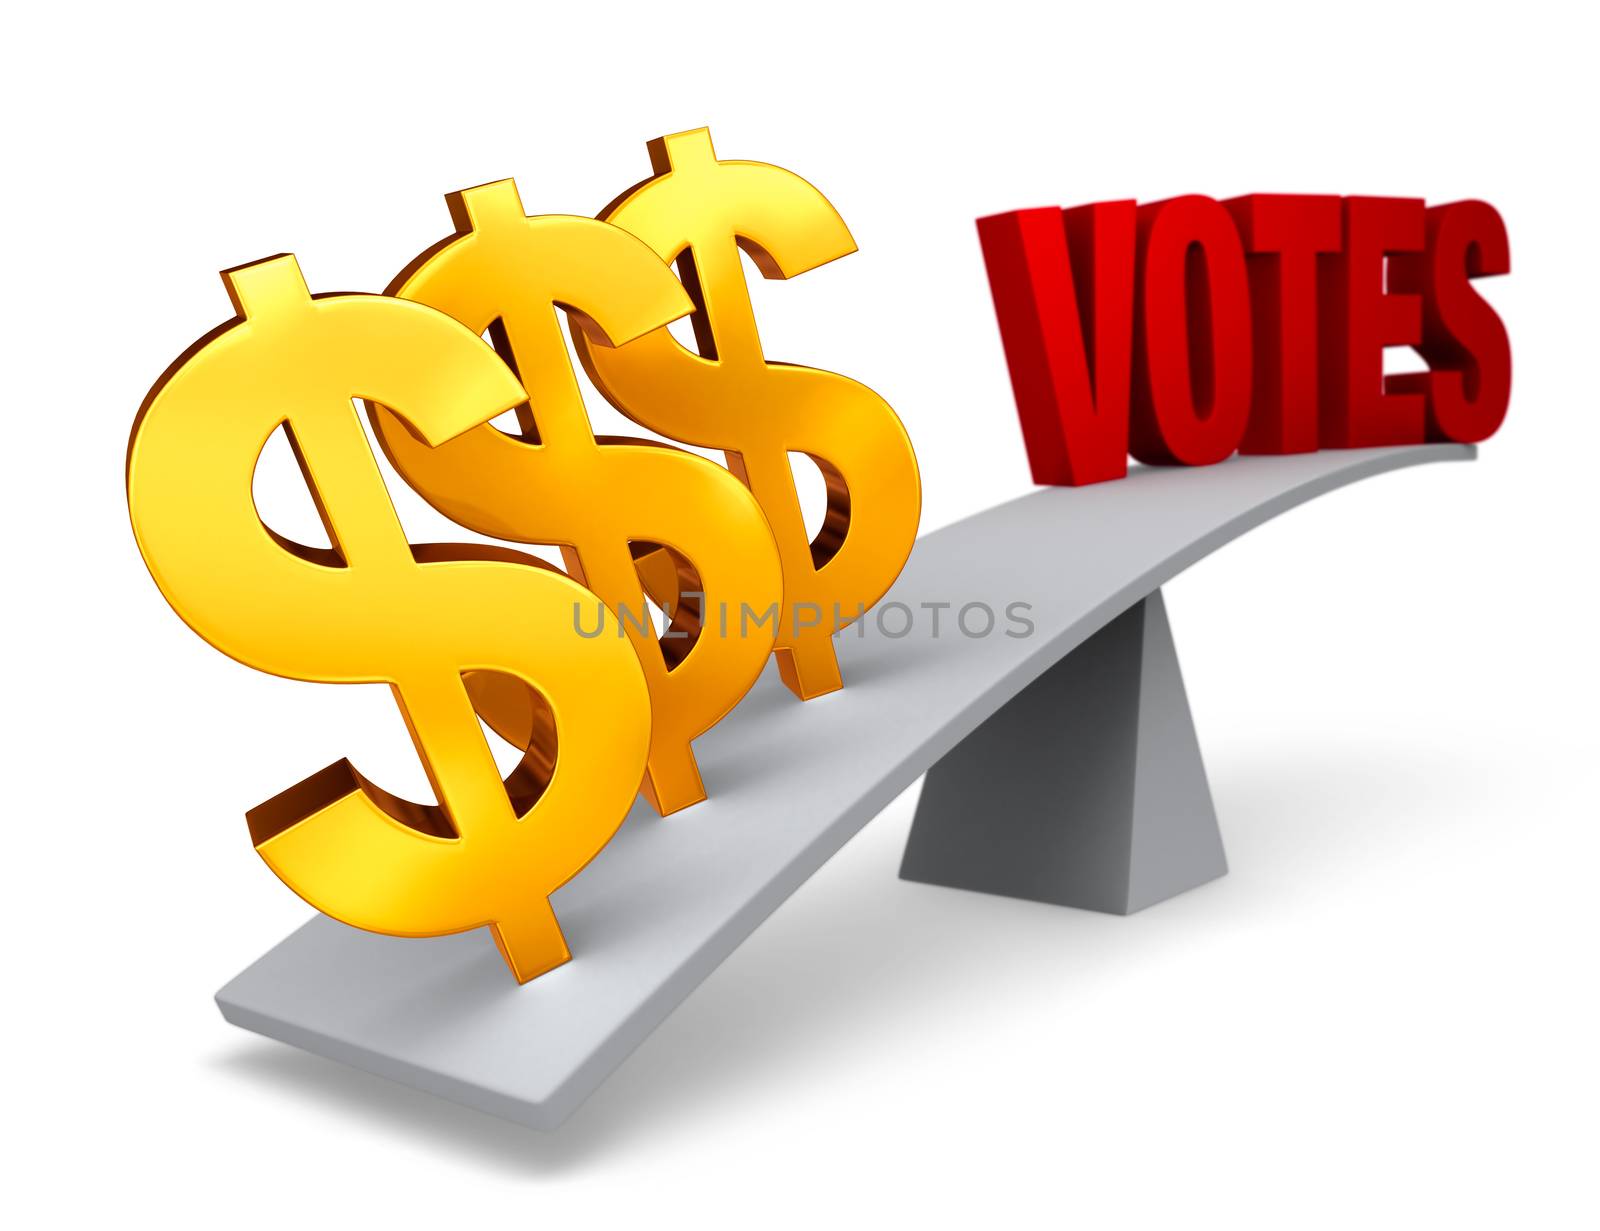 Three bright, gold dollar signs weigh one end of a gray balance beam down while a red "VOTES" sits high in the air on the other end. Focus is on dollar signs.  Isolated on white.